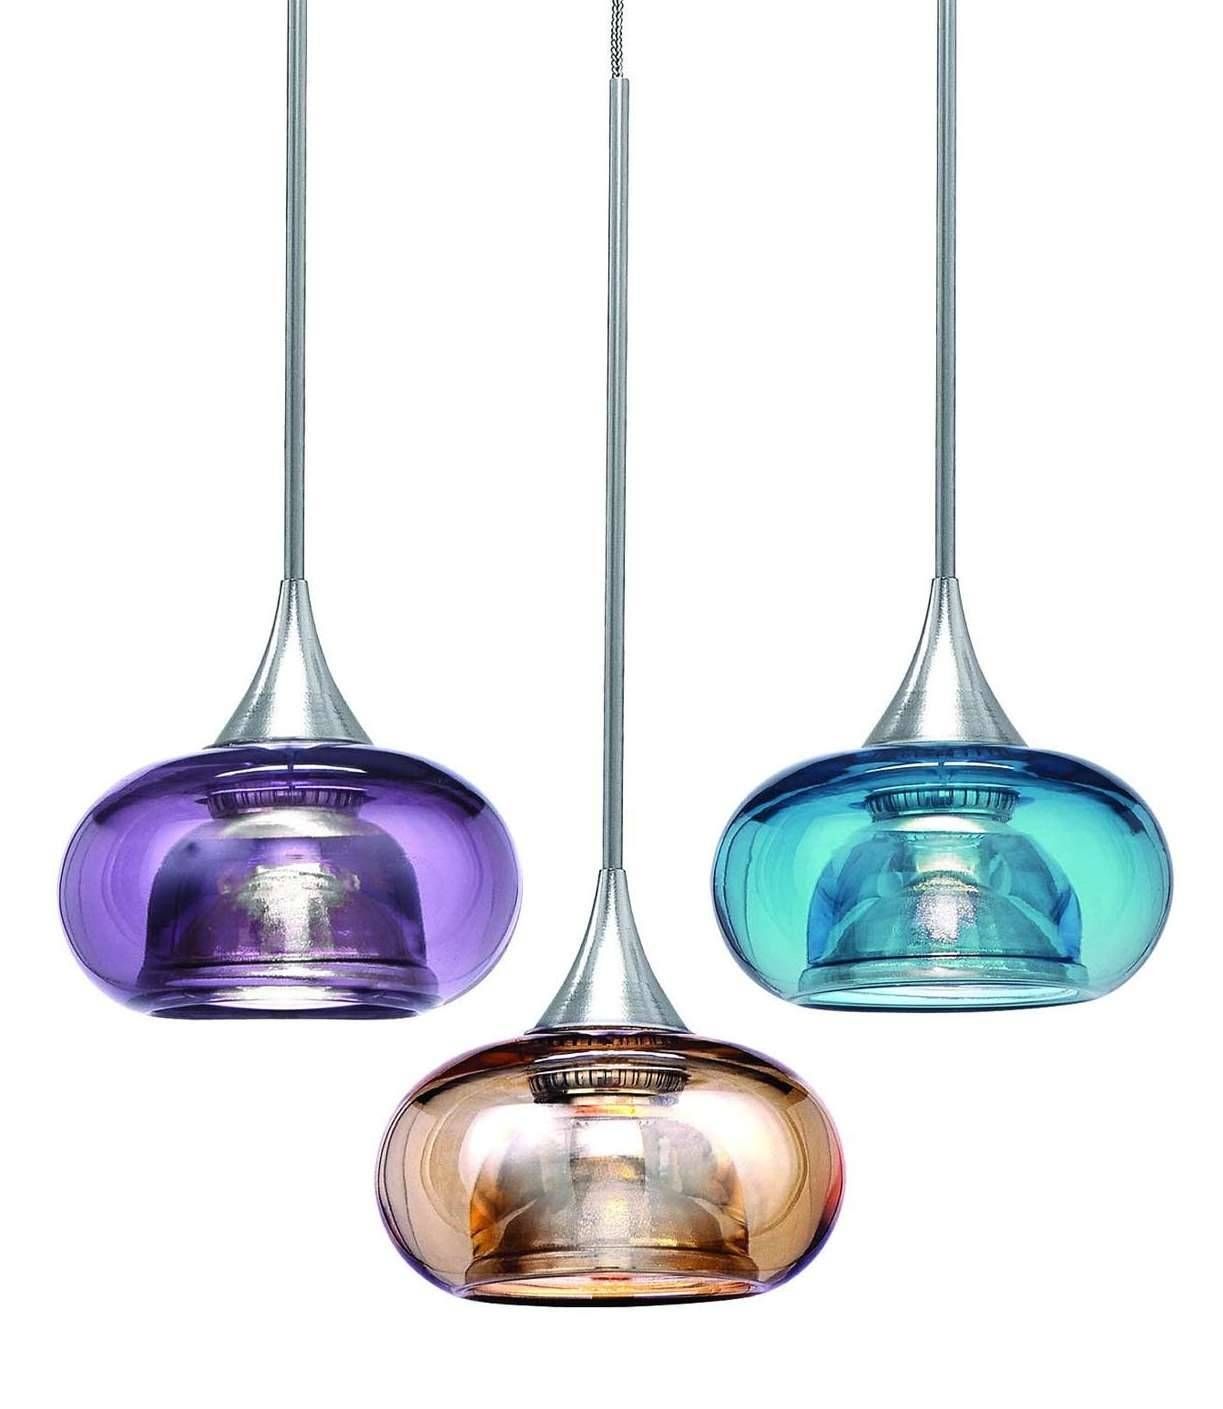 Replacement Glass Shades For Pendant Lights : Innovative Glass Regarding Coloured Glass Lights Shades (View 4 of 15)